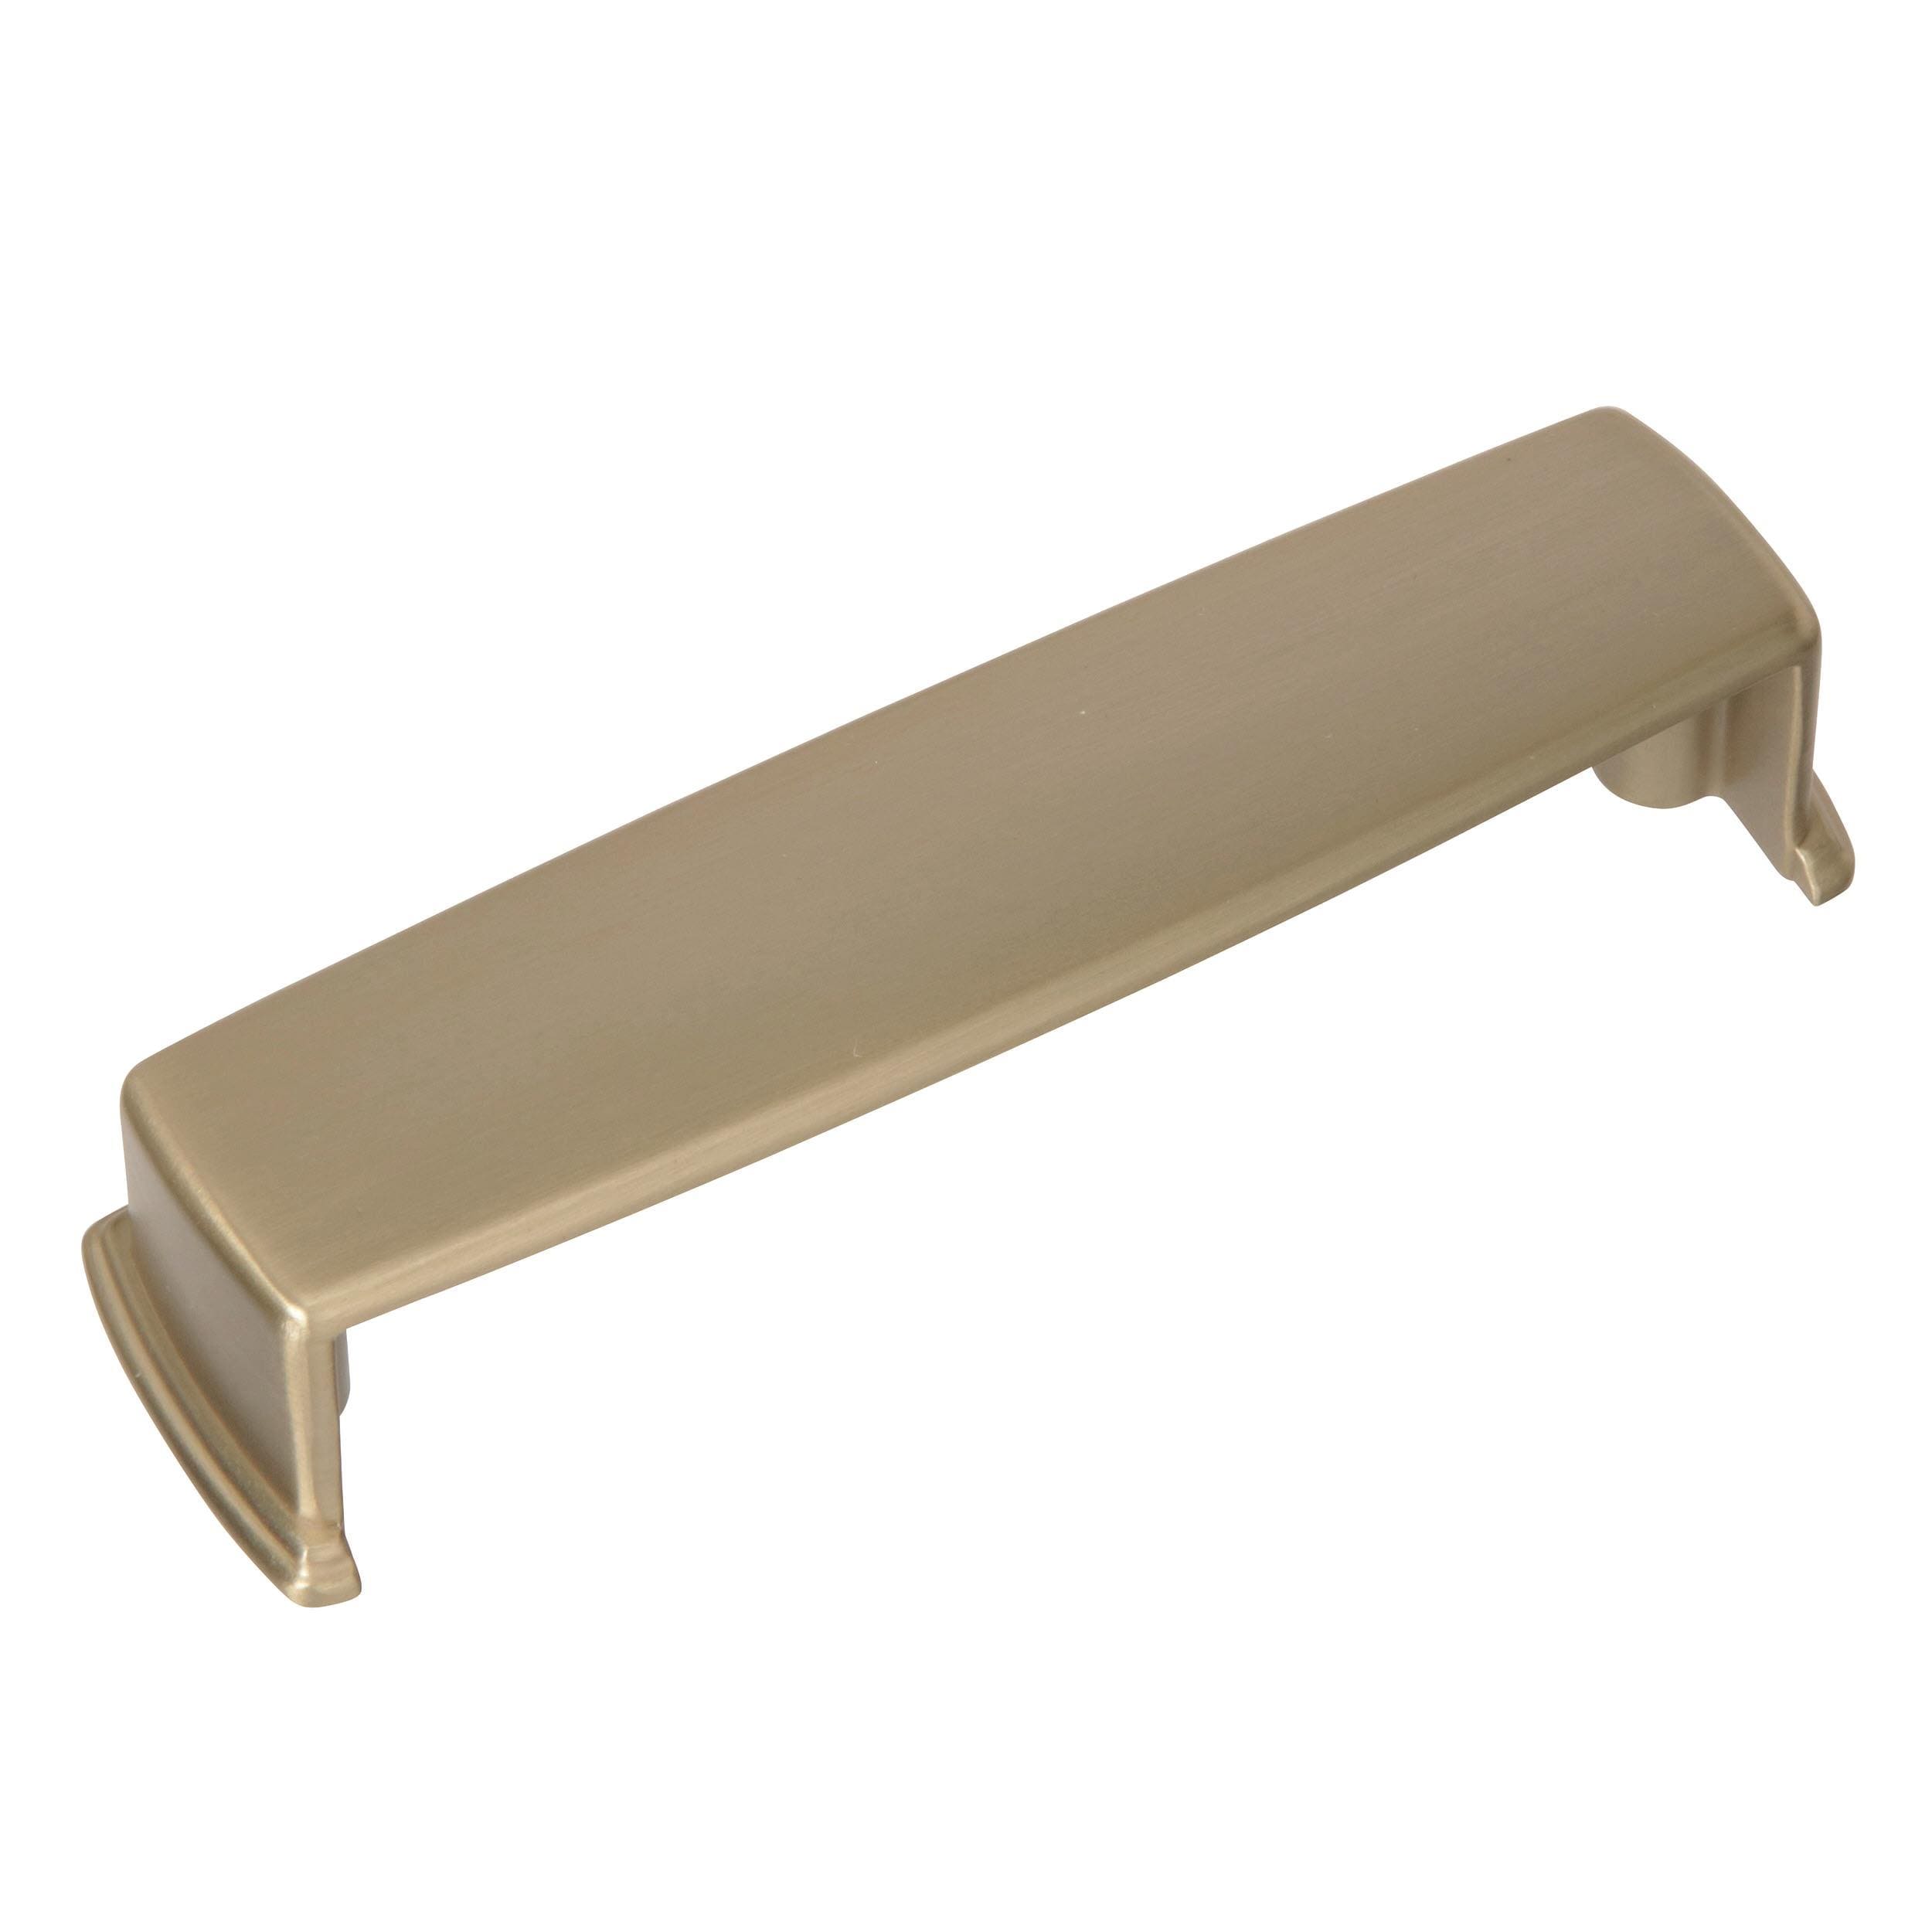 Champagne the Amerock Golden Drawer Pulls in Rectangular Pulls Kane to Center Drawer Center at Cup department 3-3/4-in